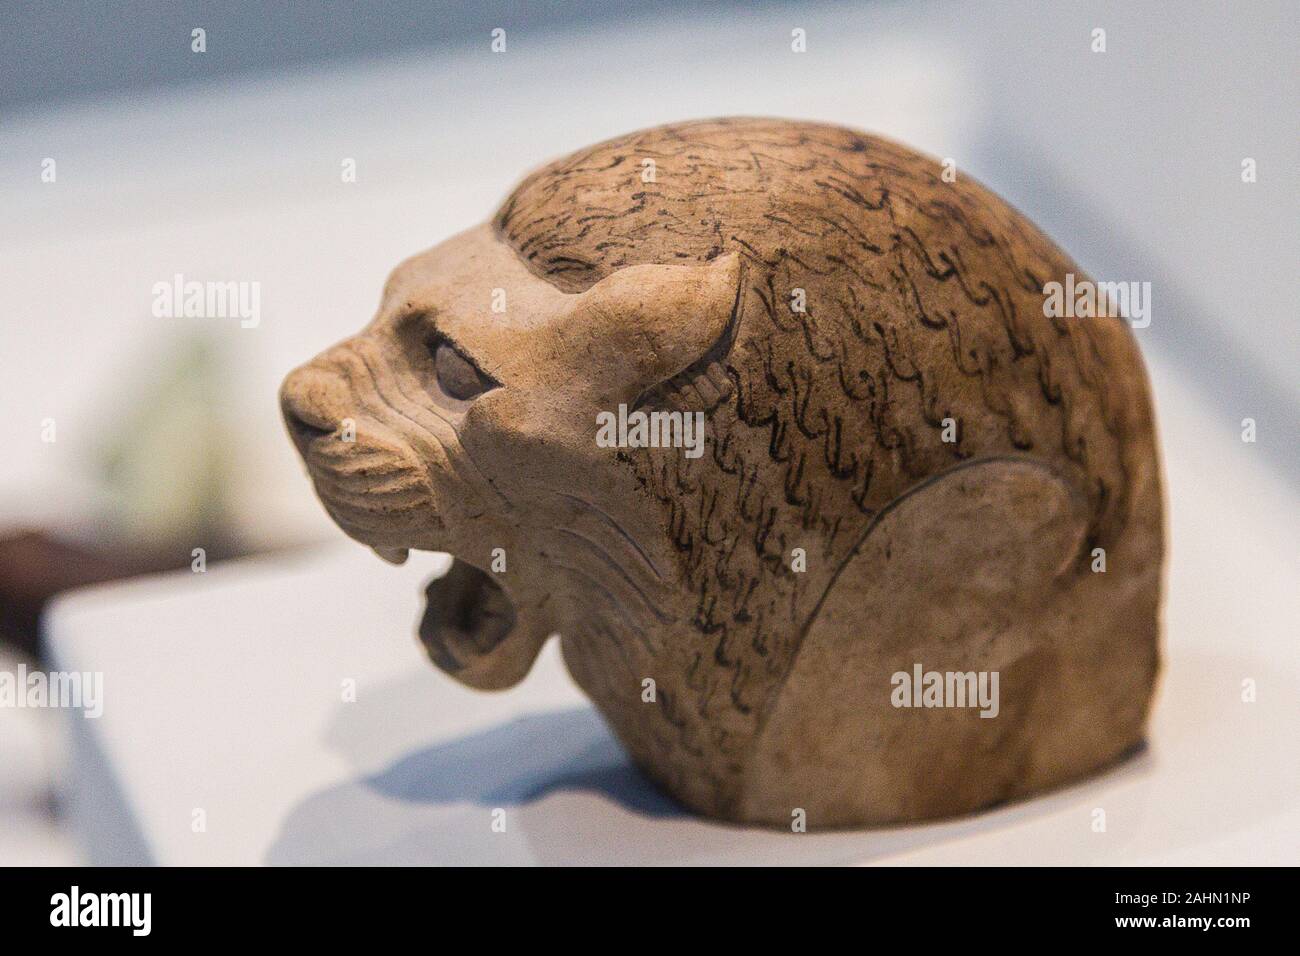 Exhibition 'The animal kingdom in Ancient Egypt', organized in 2015 by the Louvre Museum. Head of a roaring lion, Late Period, limestone, E 22722. Stock Photo